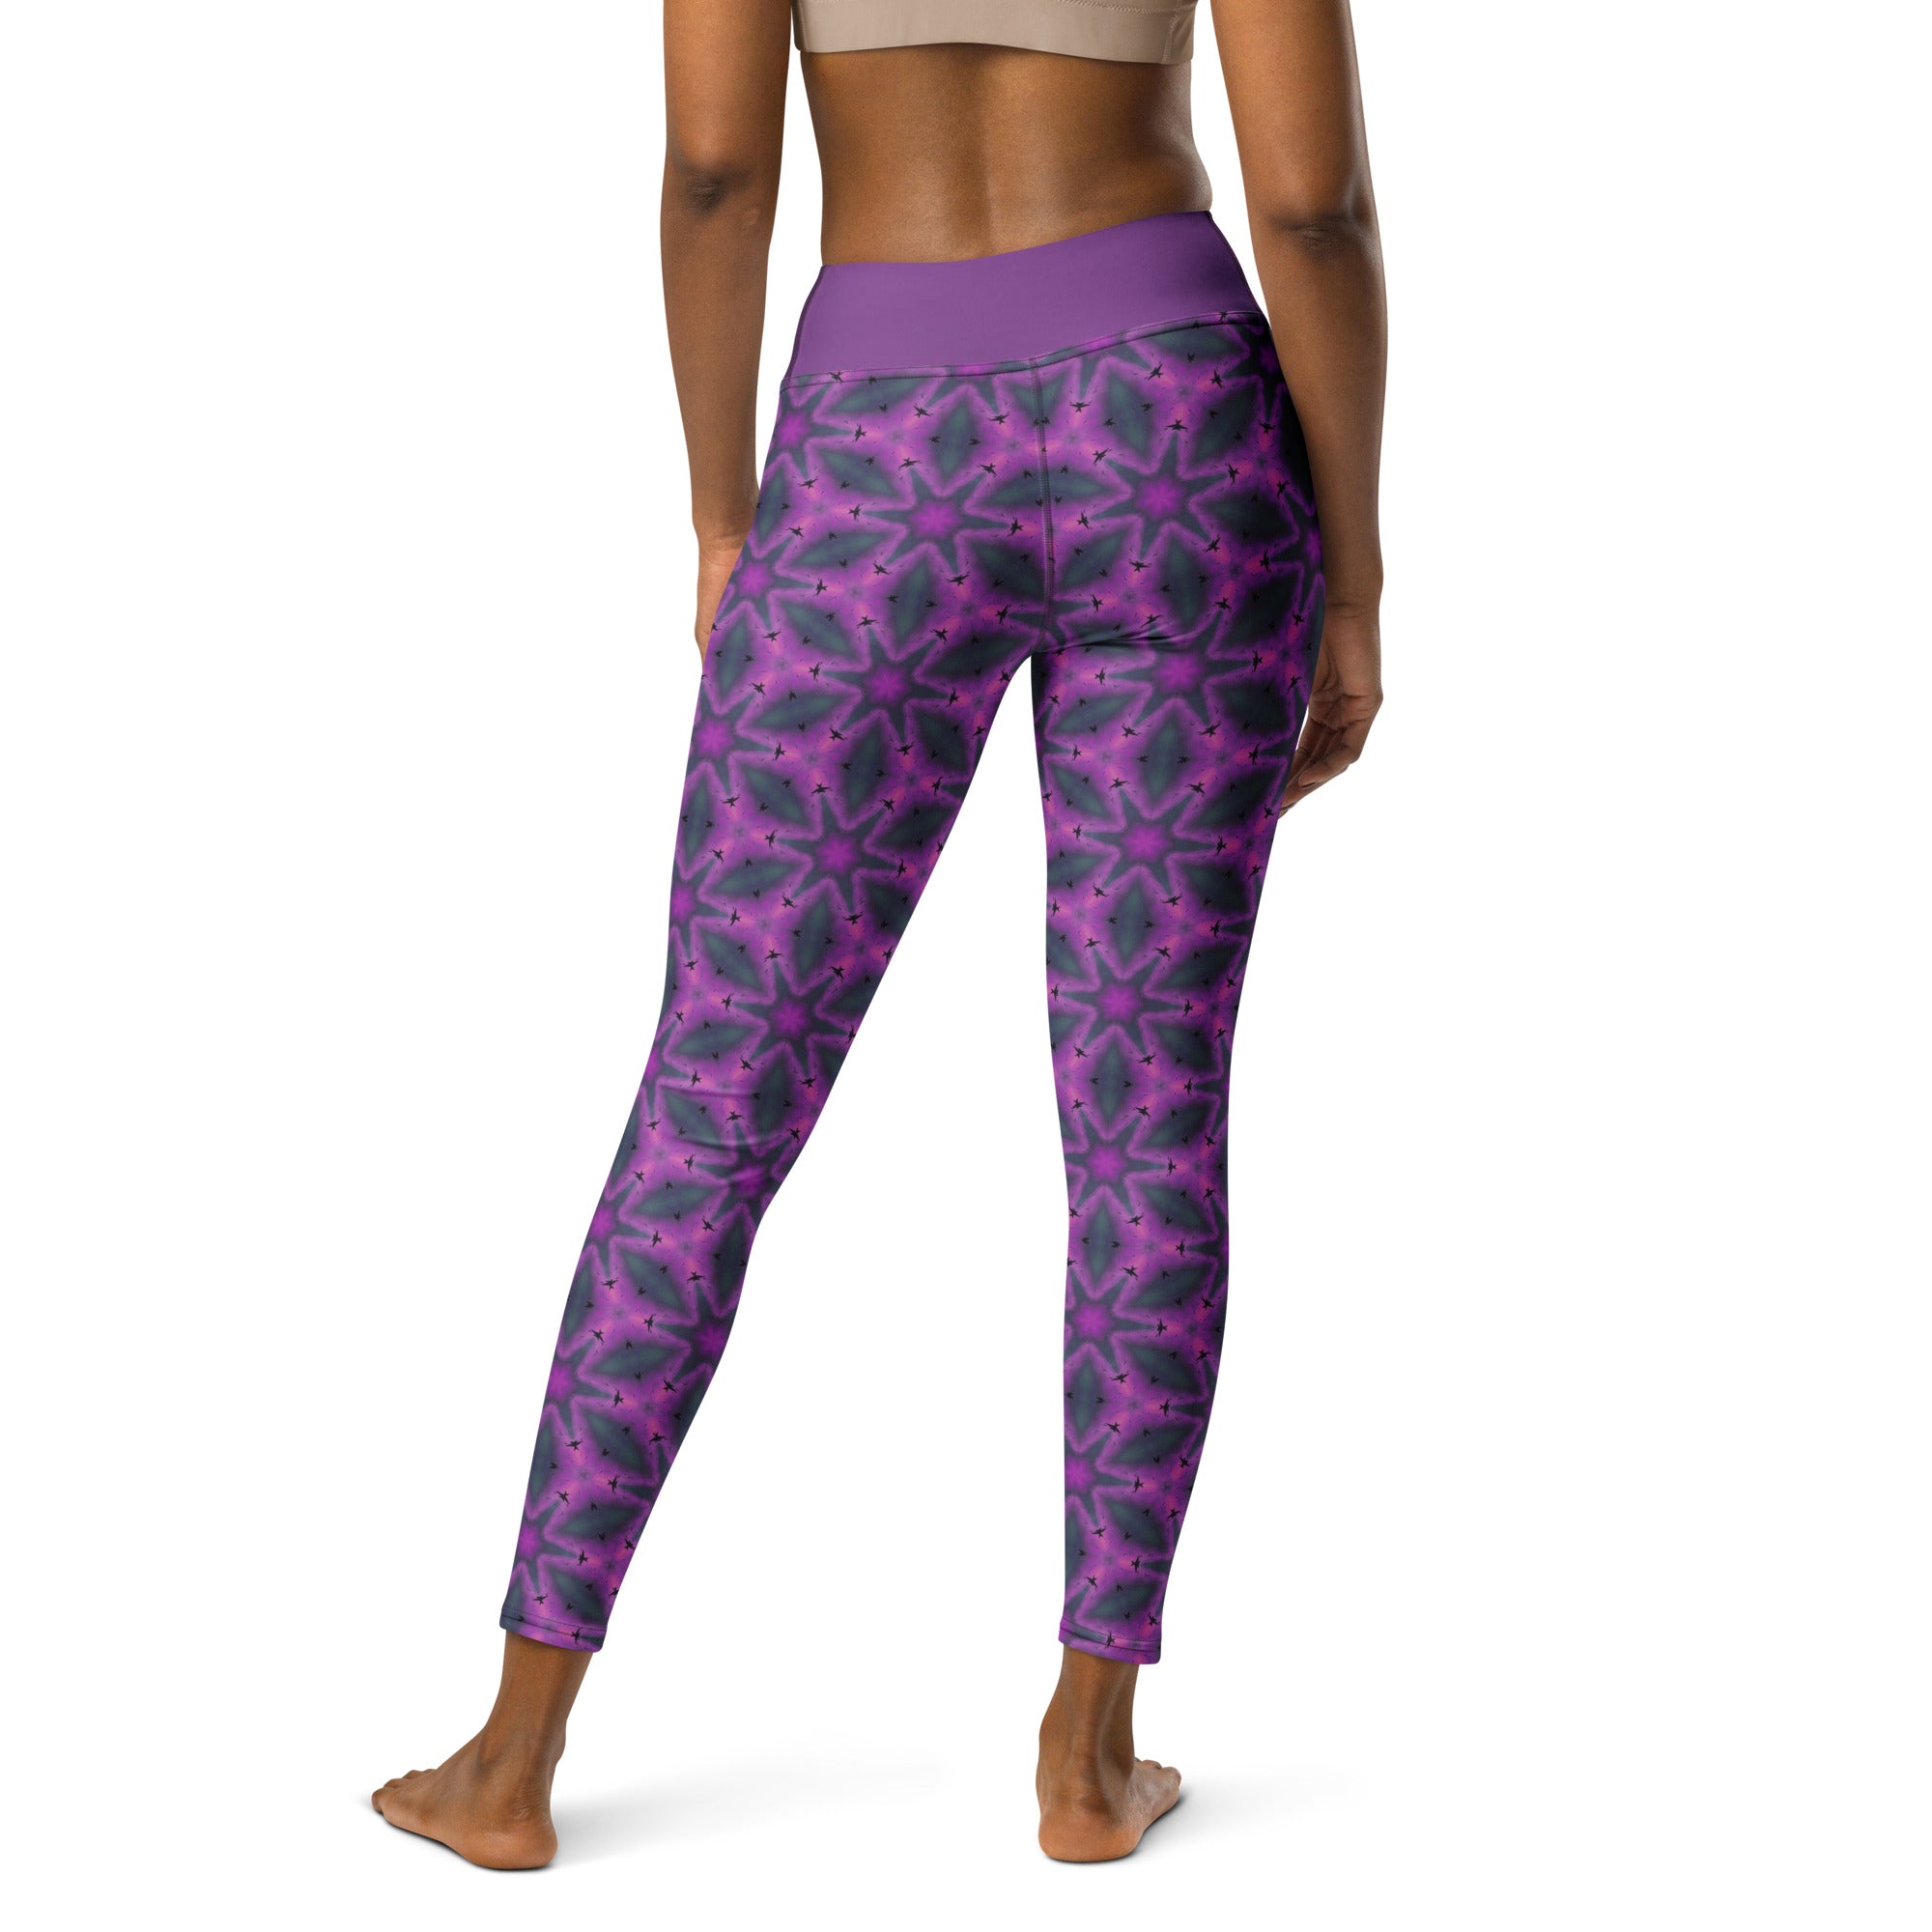 Woman wearing Floral Bliss Yoga Leggings during yoga session